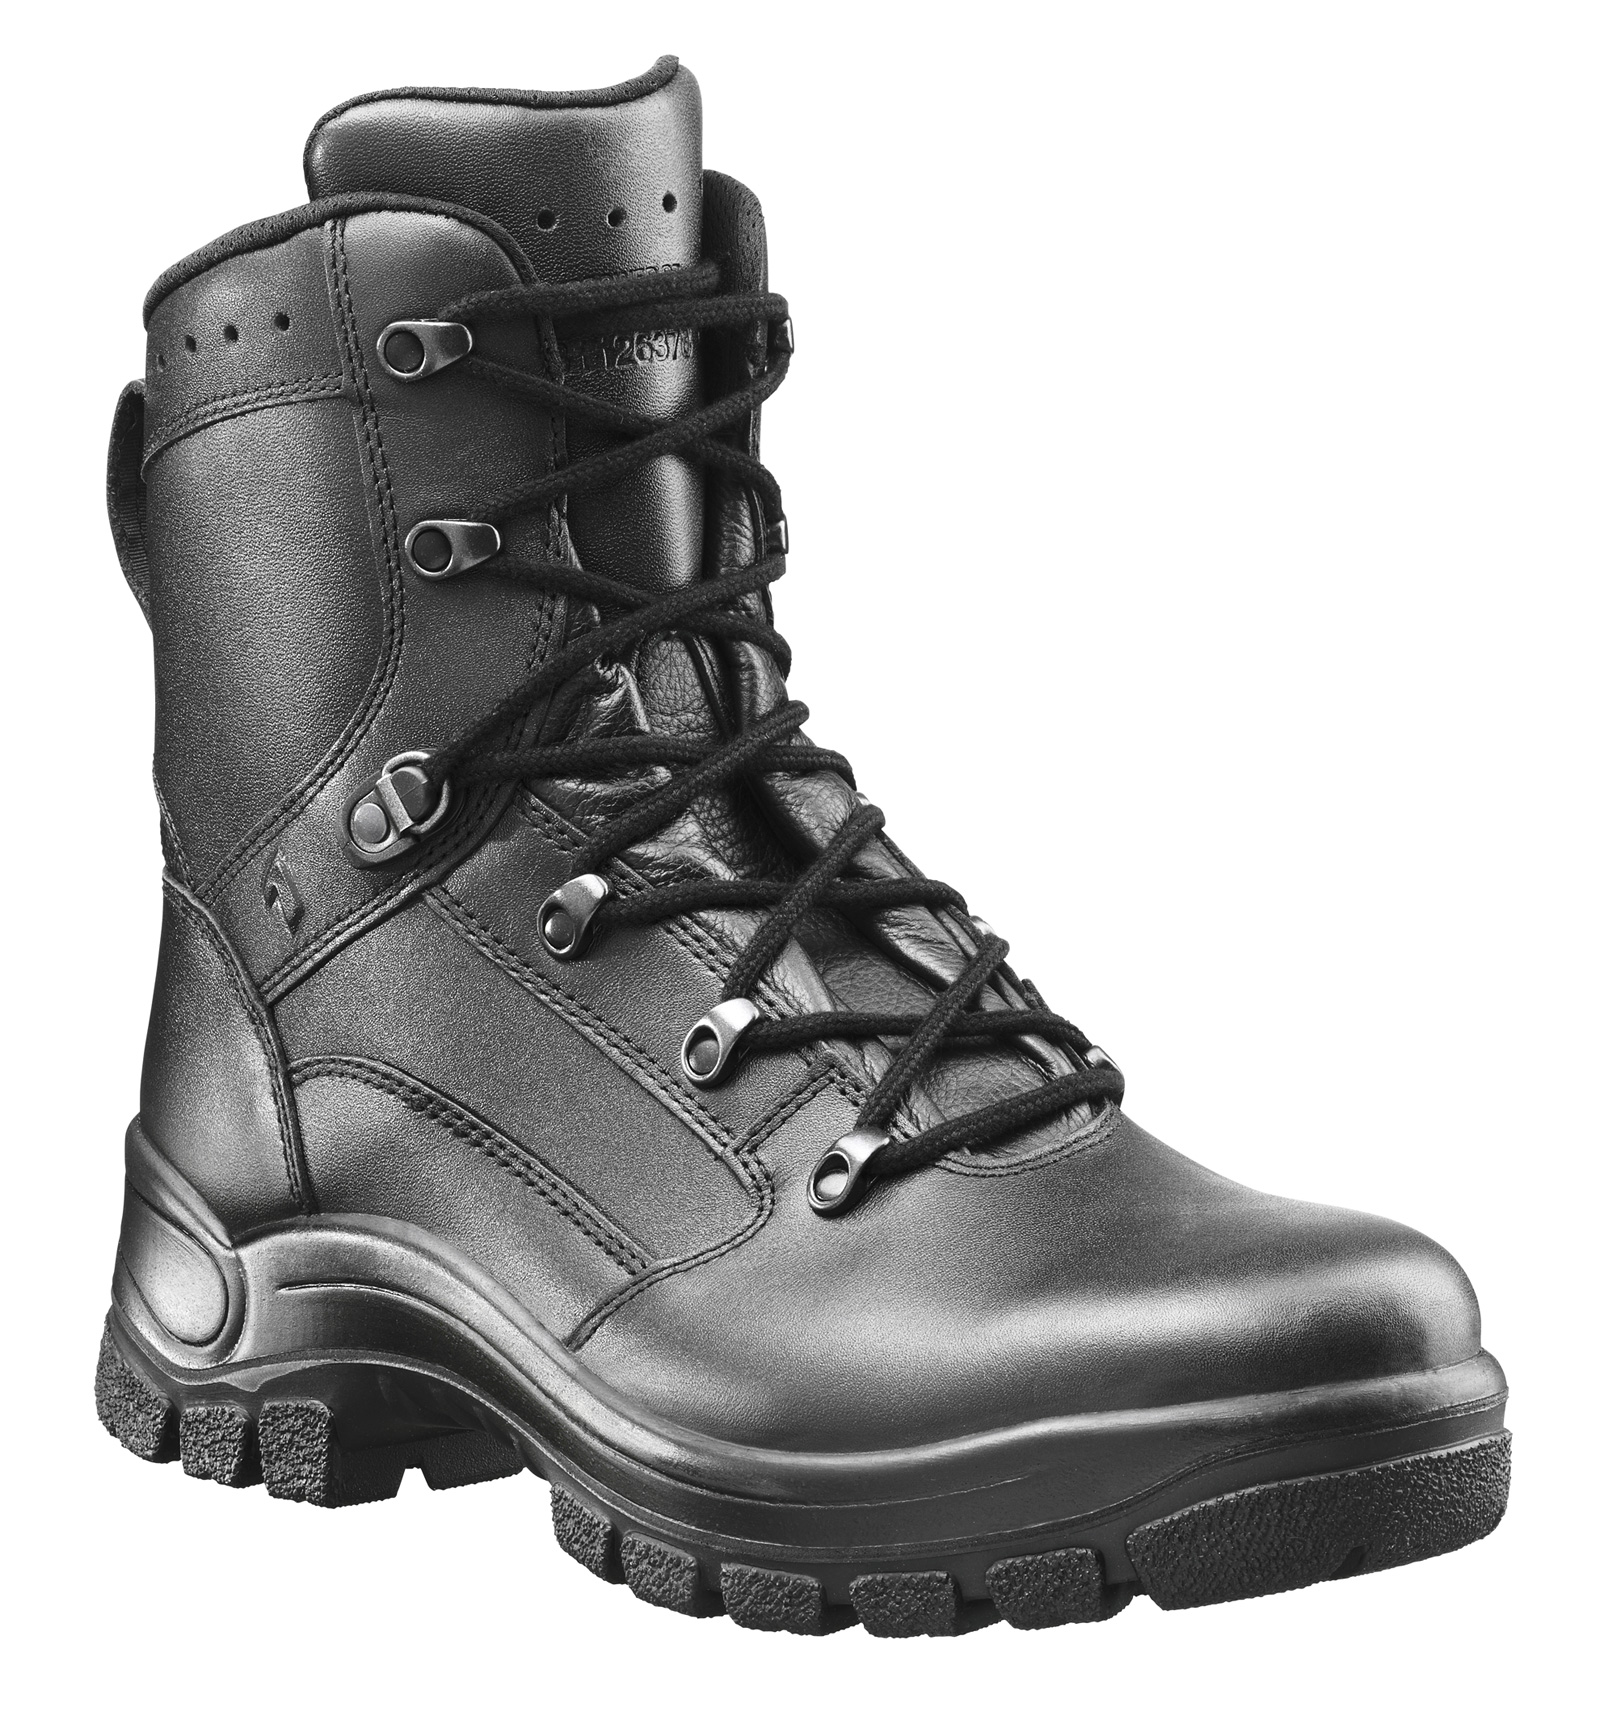 7 Reg Army Boots Insulated Goretex Boots Liners Cold Weather Boots Liner 7 N